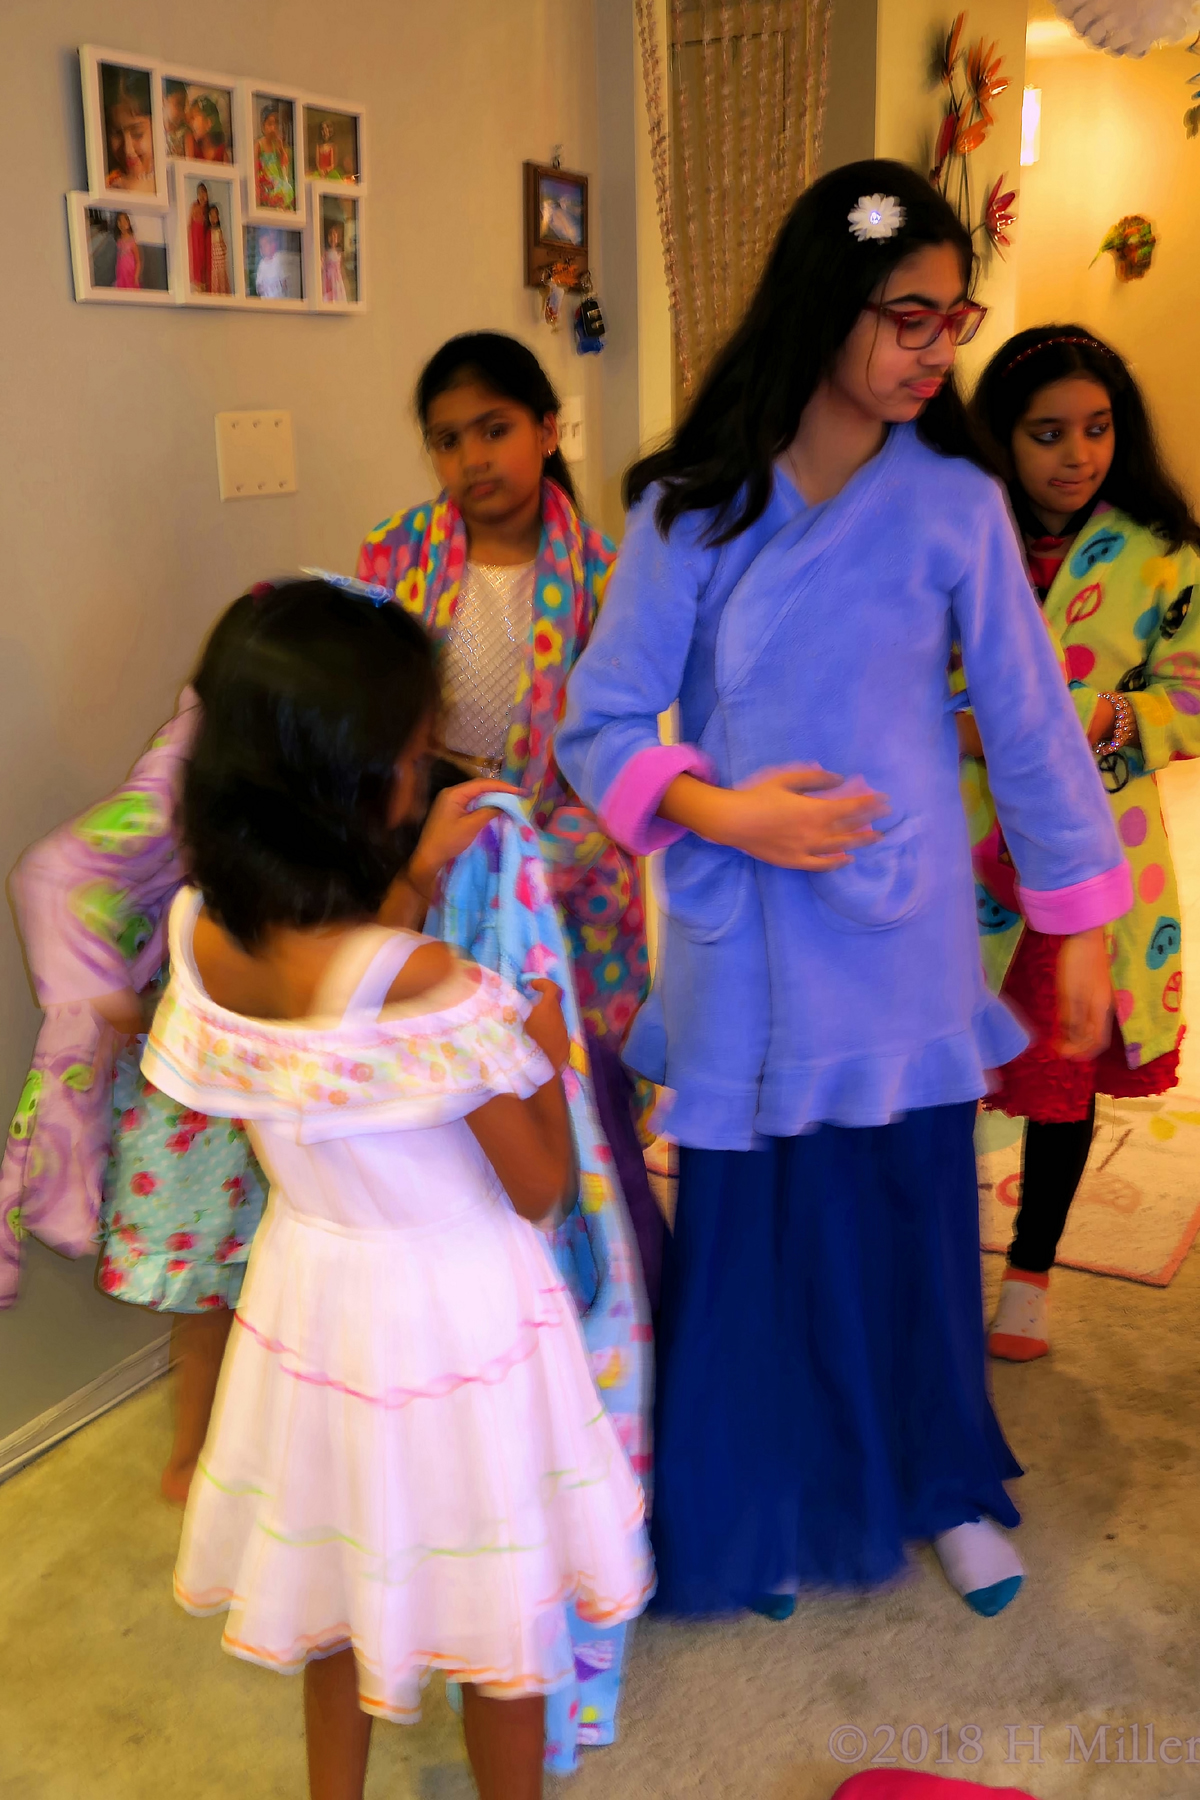 While Trying On Their Colorful Spa Robes! 1